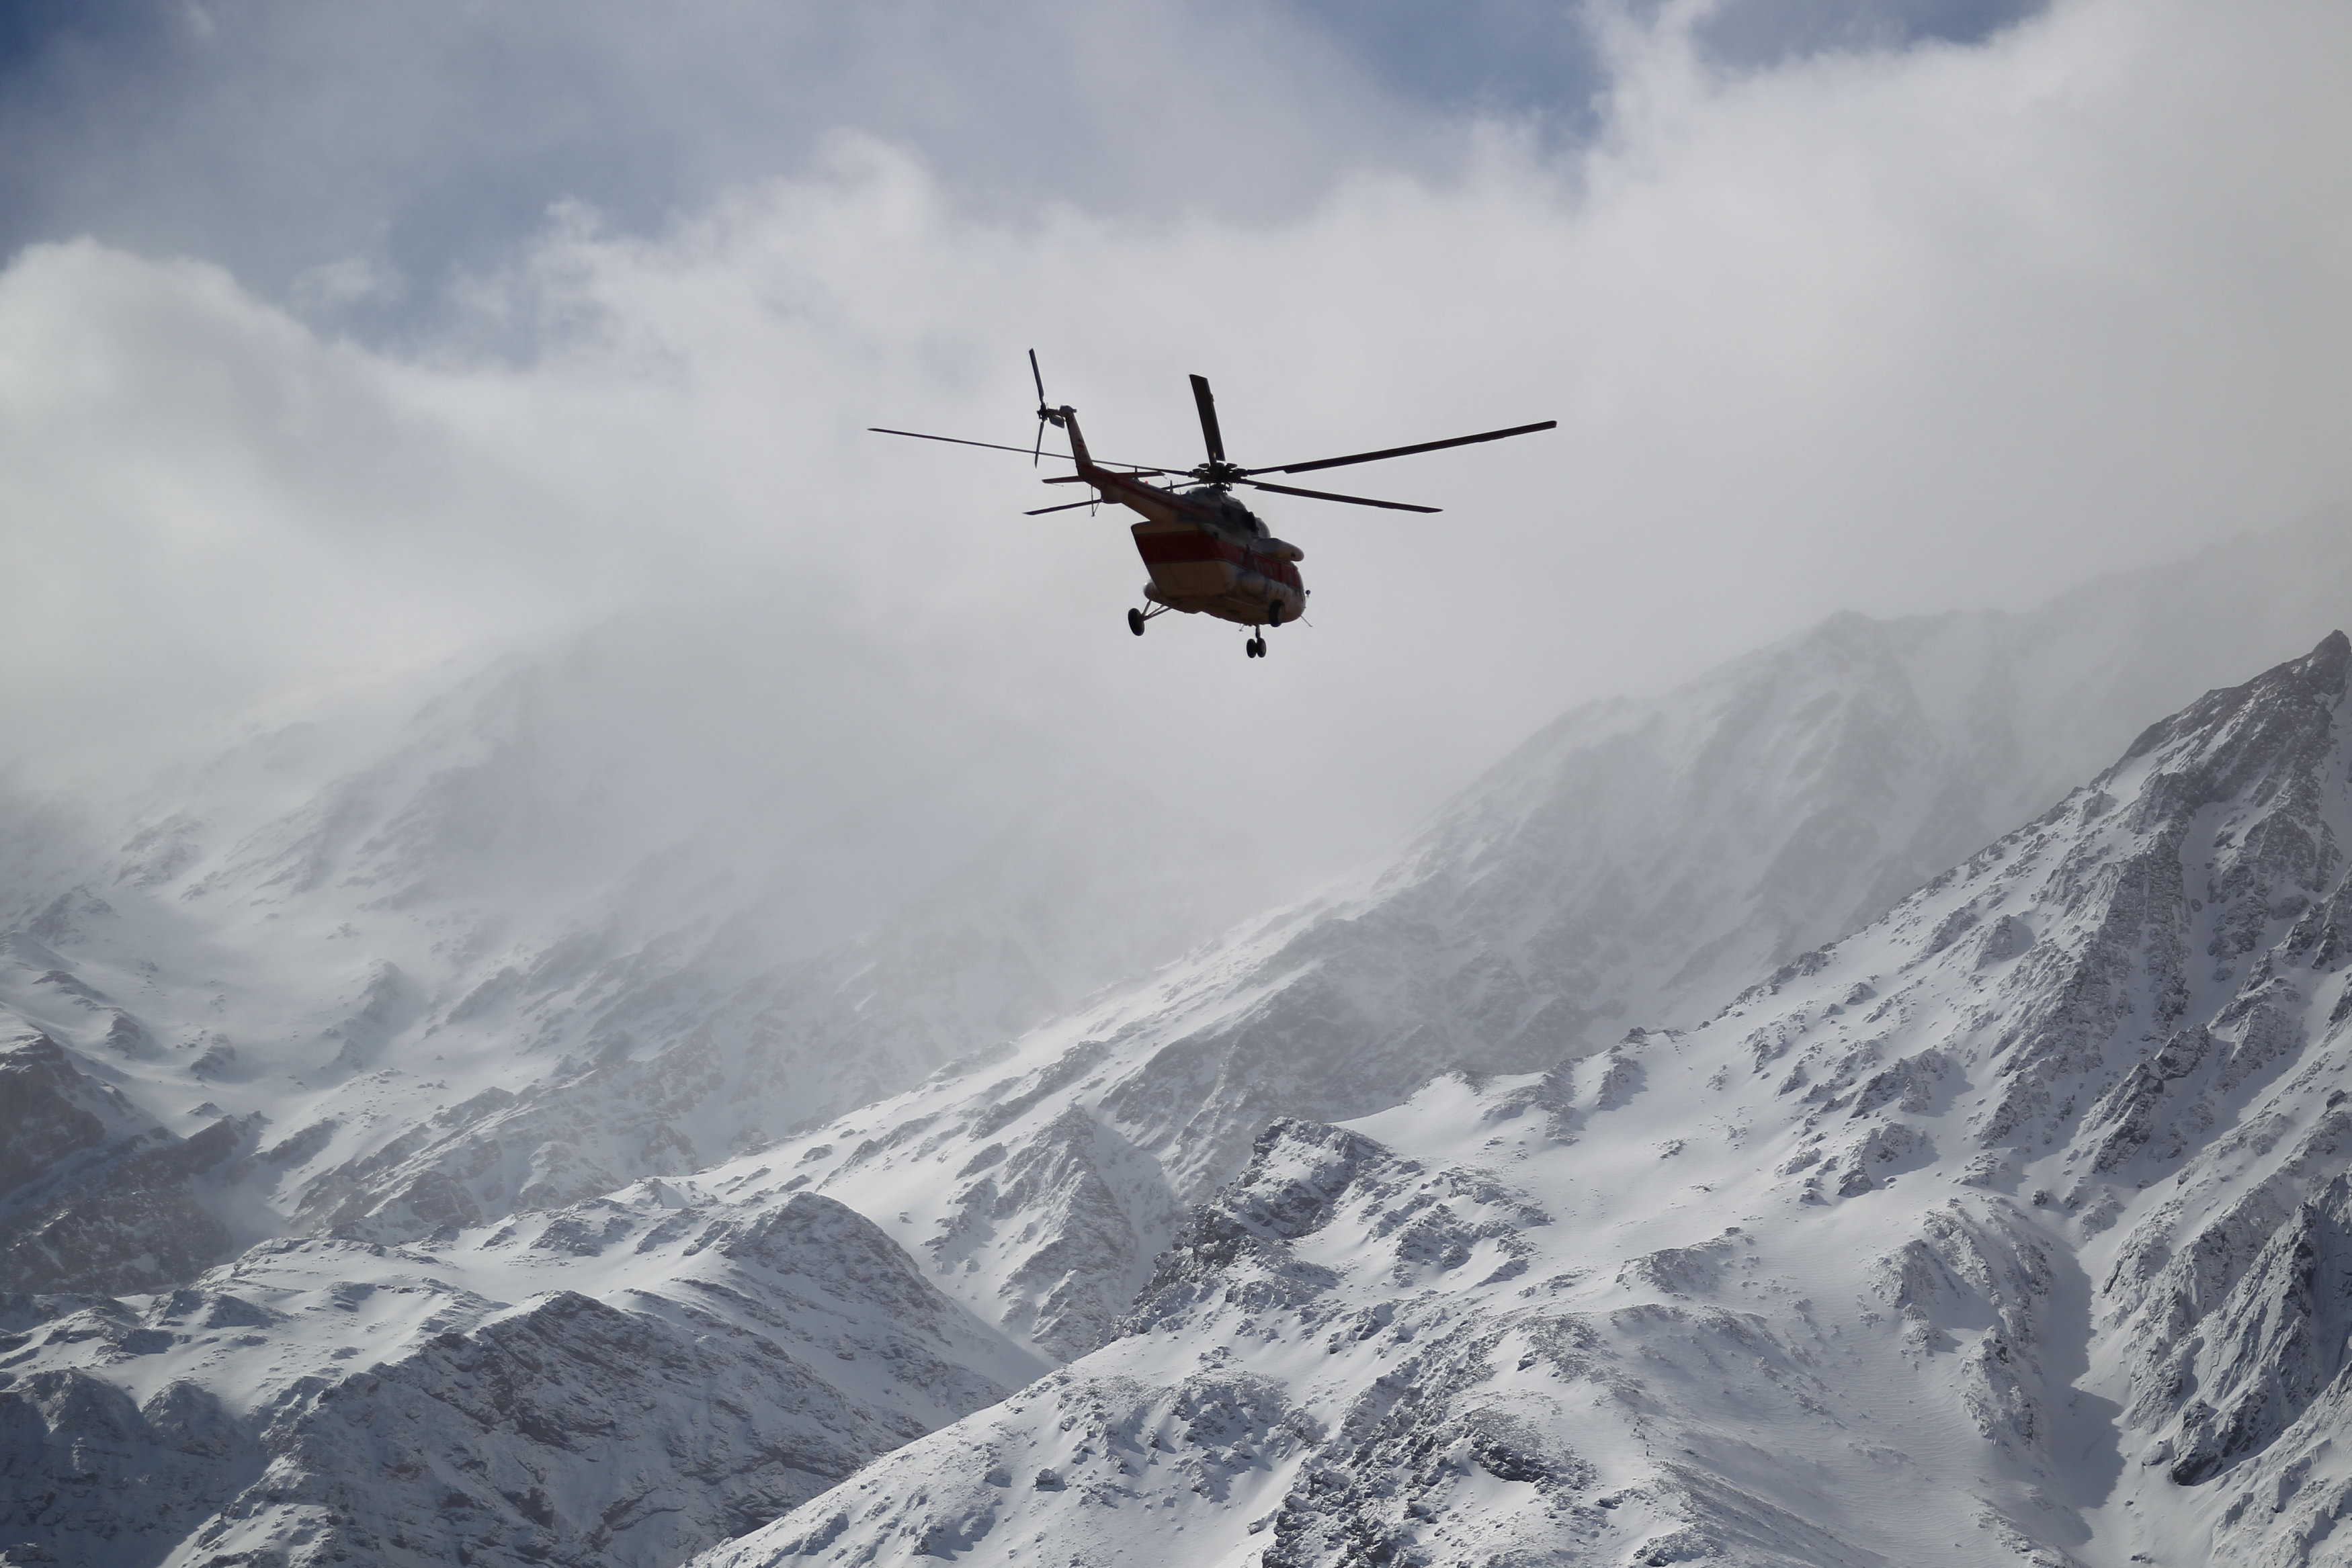 Emergency and rescue helicopter searches for the plane that crashed in a mountainous area of central Iran